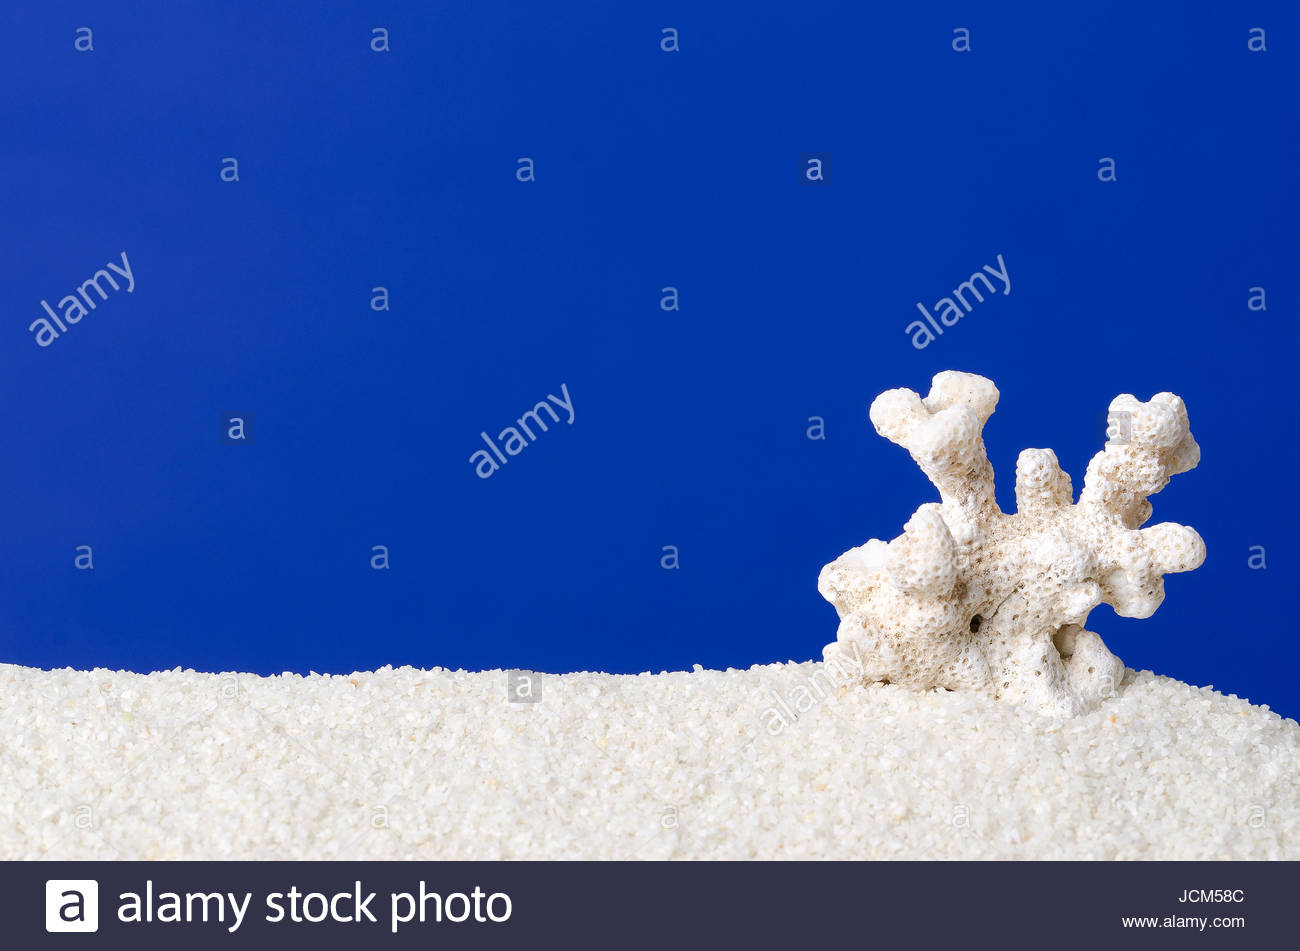 White Coral On Sand With Ultramarine Background Small